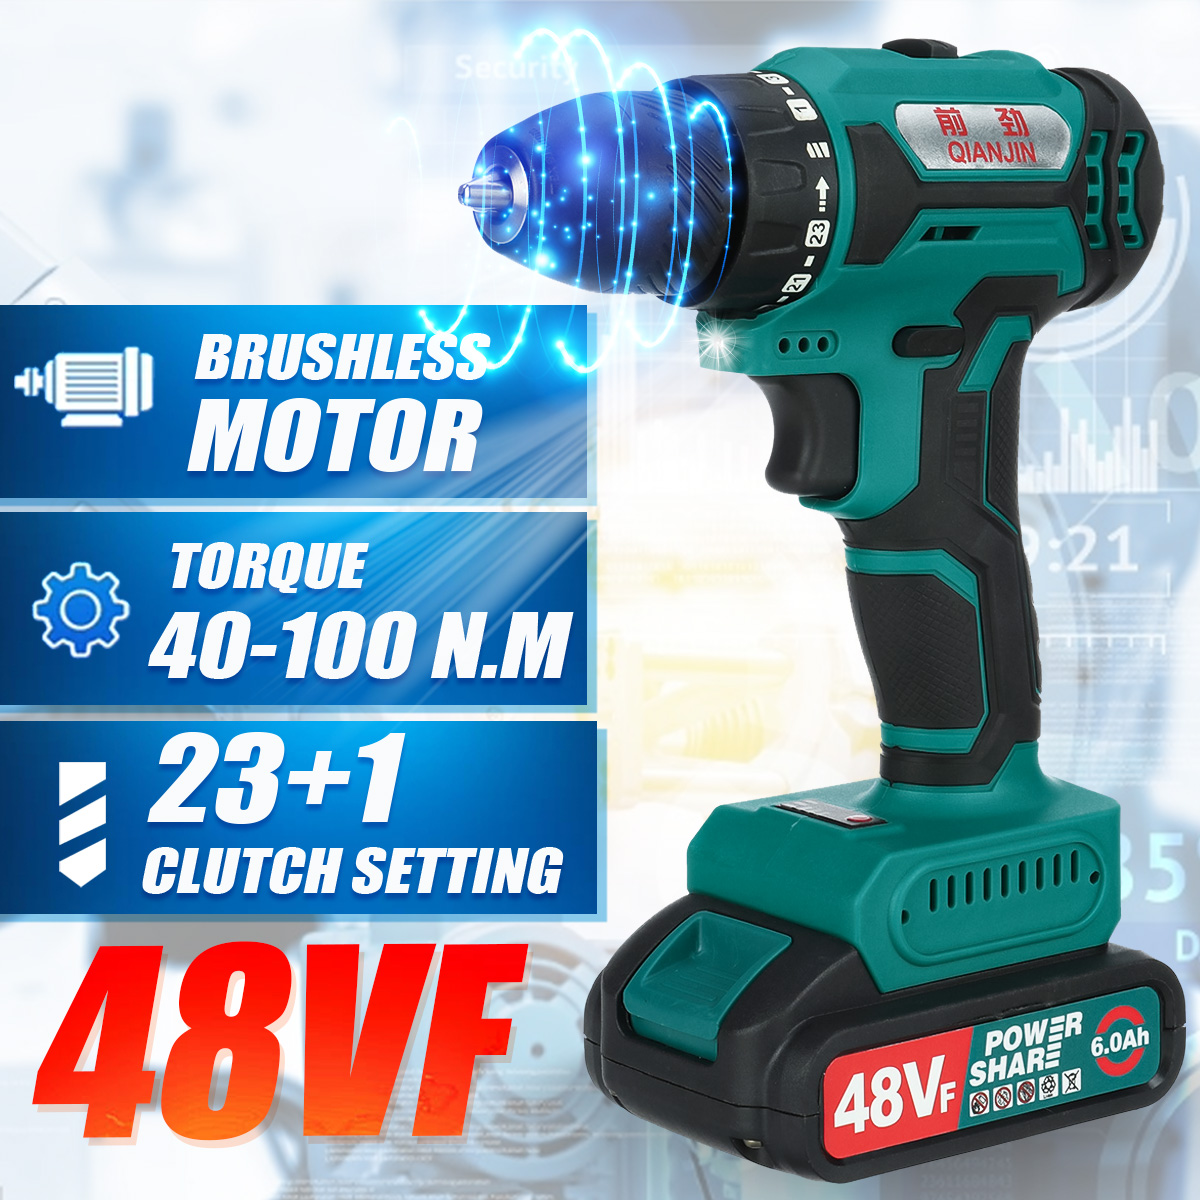 48VF-Brushless-High-Power-Torque-Drill-2-Speed-Rechargable-Electric-Screwdriver-Drill-With-None12-Pc-1840212-2